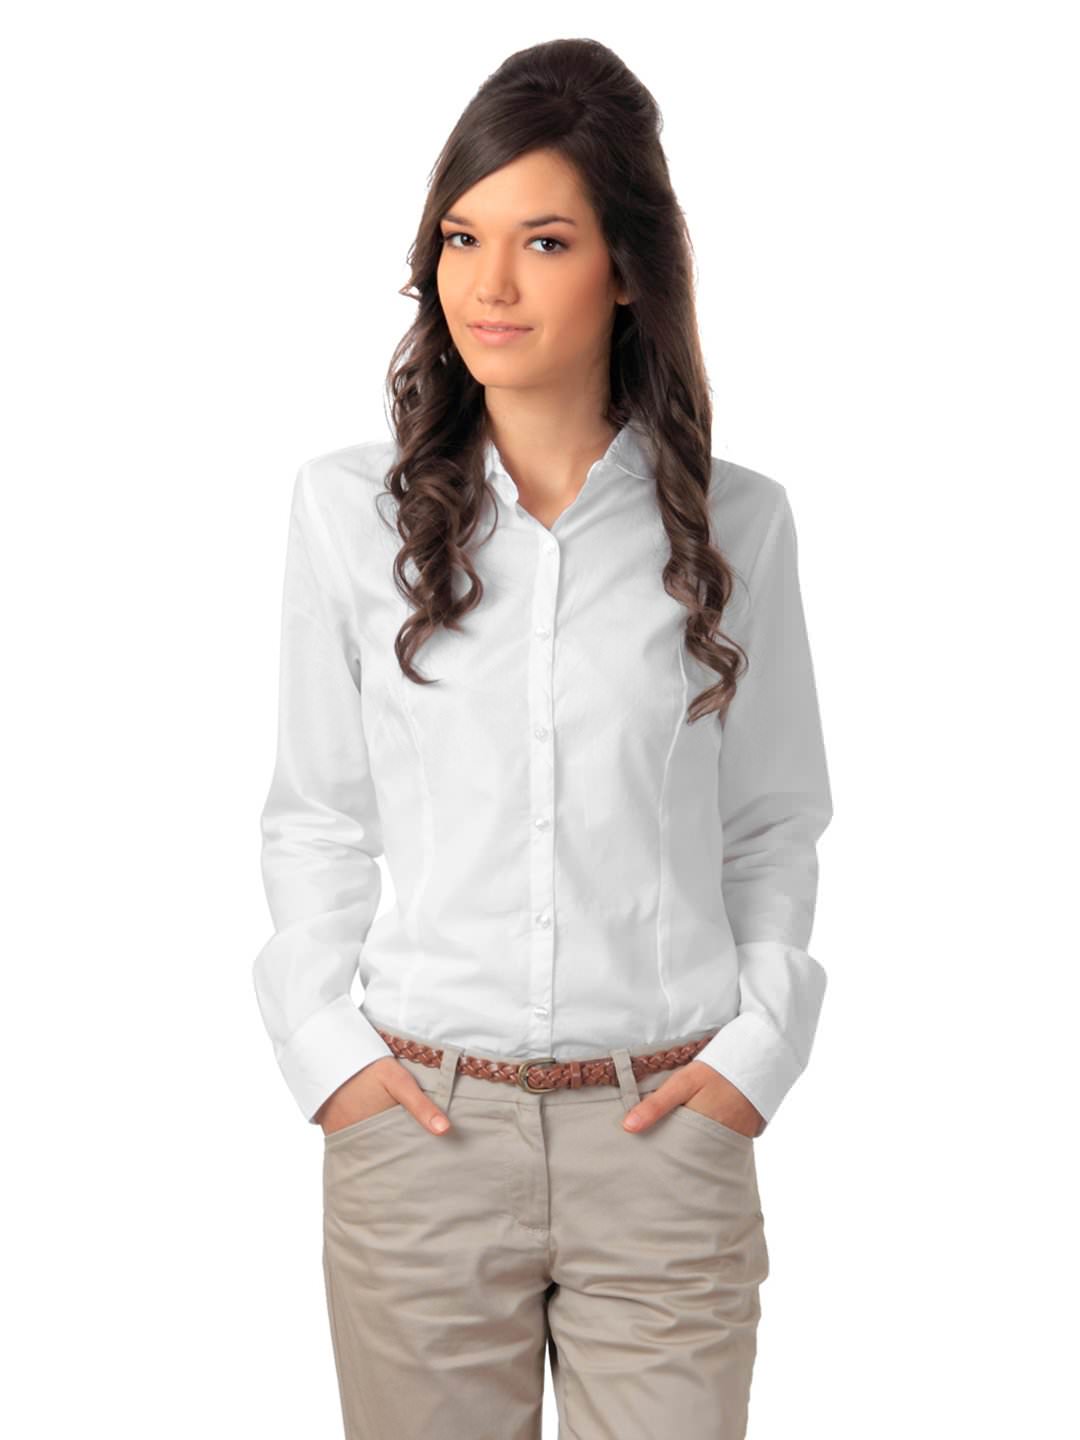 Image result for white shirt woman